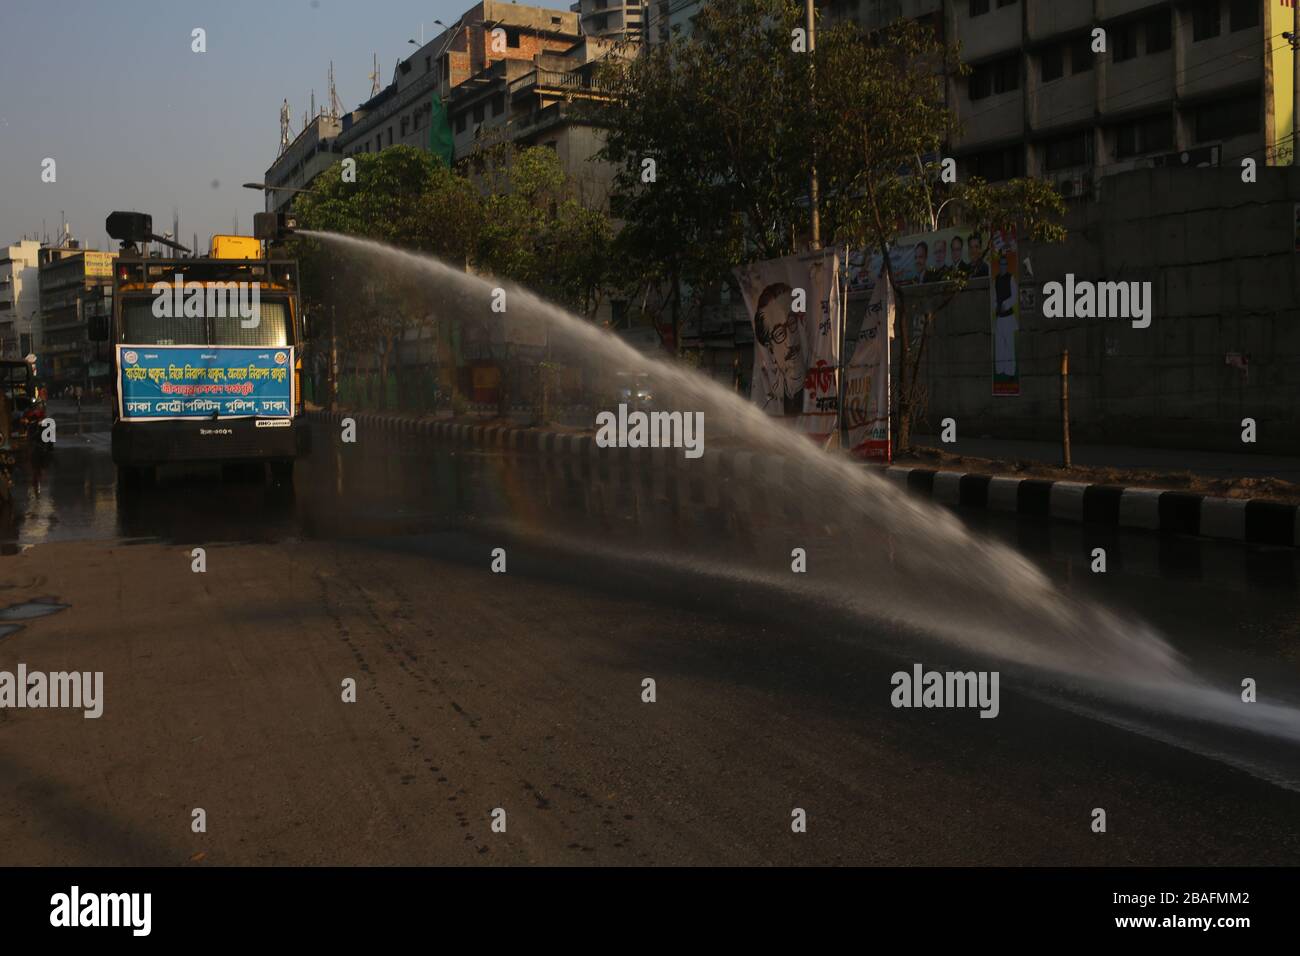 Dhaka Metropolitan Police is spraying disinfectant to the streets of Dhaka city to keep the city clean and prevent COVID-19 from spreading. Total 44 people have been infected by Covid-19 in Bangladesh, of whom 5 died confirmed by IEDCR. (Photo by Md. Rakibul Hasan/Pacific Press) Stock Photo